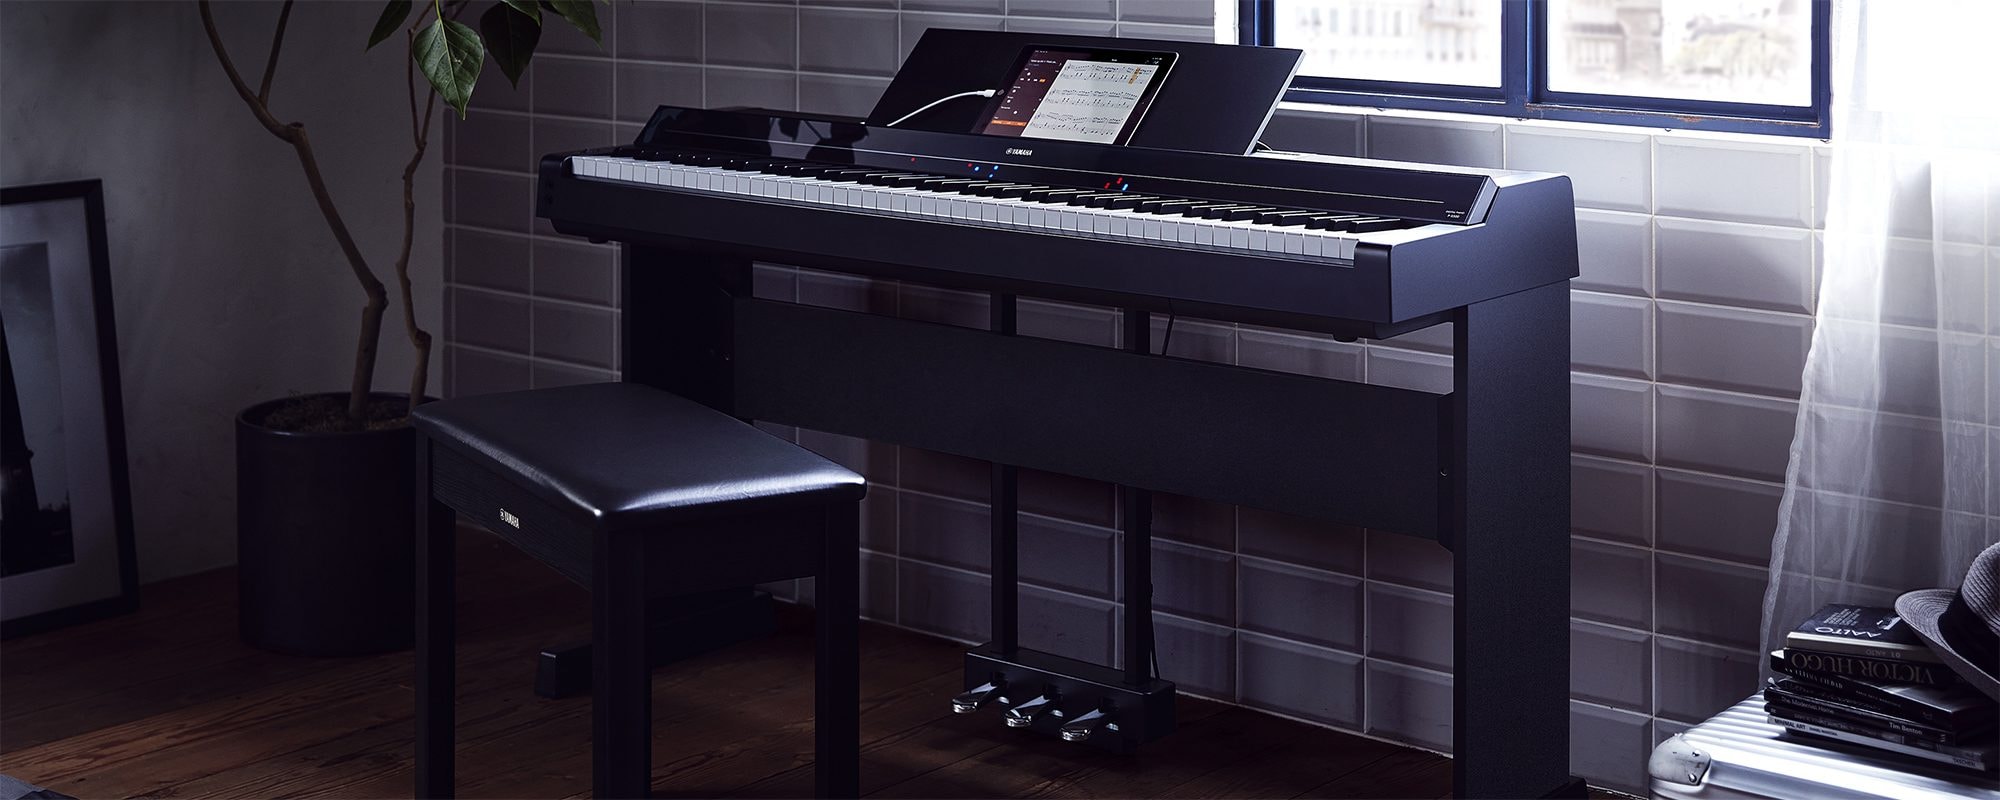 A Yamaha P-S500 digital piano in a room